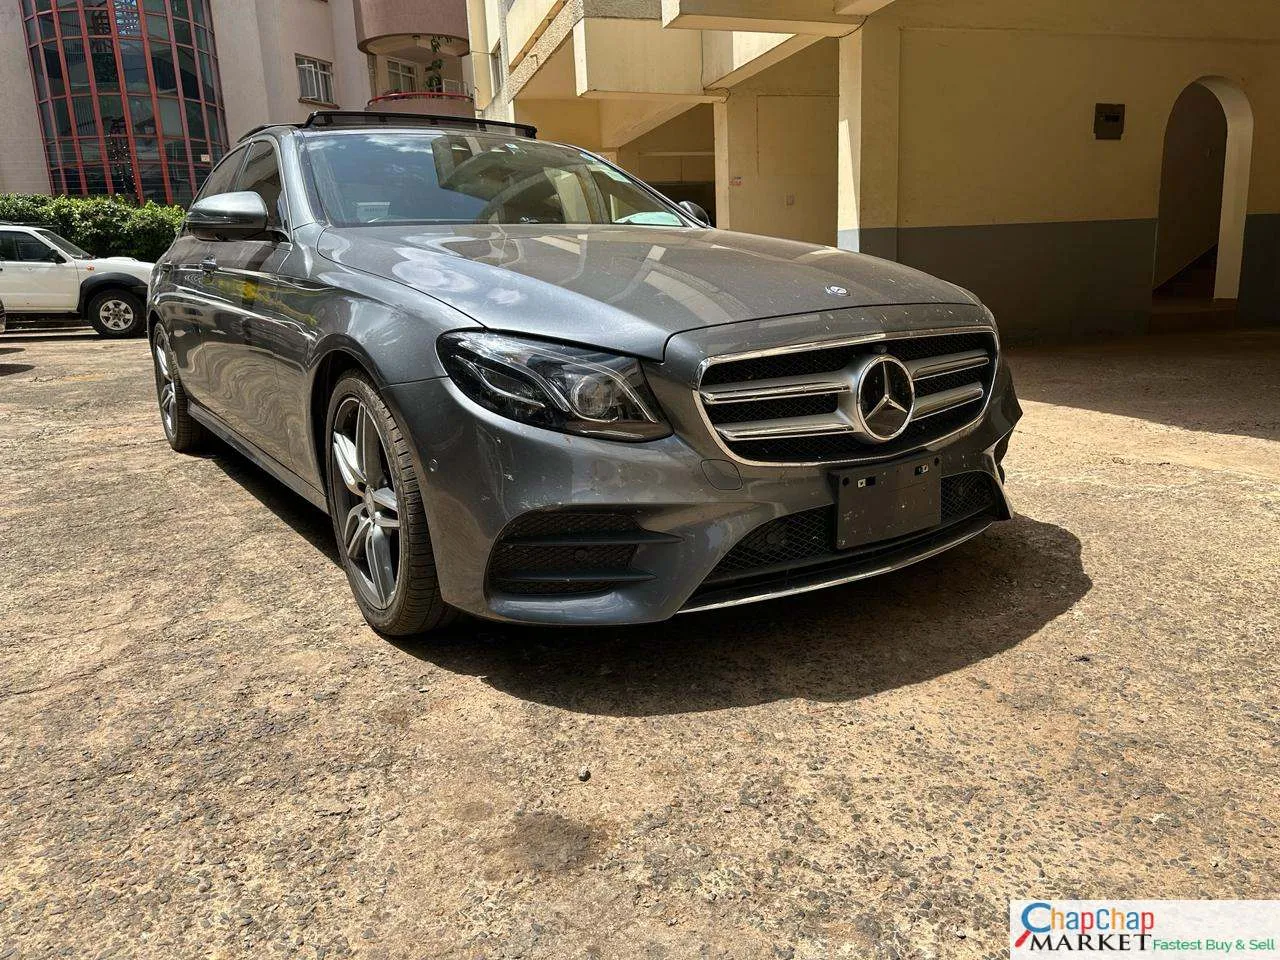 Mercedes Benz E200 W213 For Sale in Kenya NEW🔥 You Pay 30% DEPOSIT Trade in OK EXCLUSIVE hire purchase installments